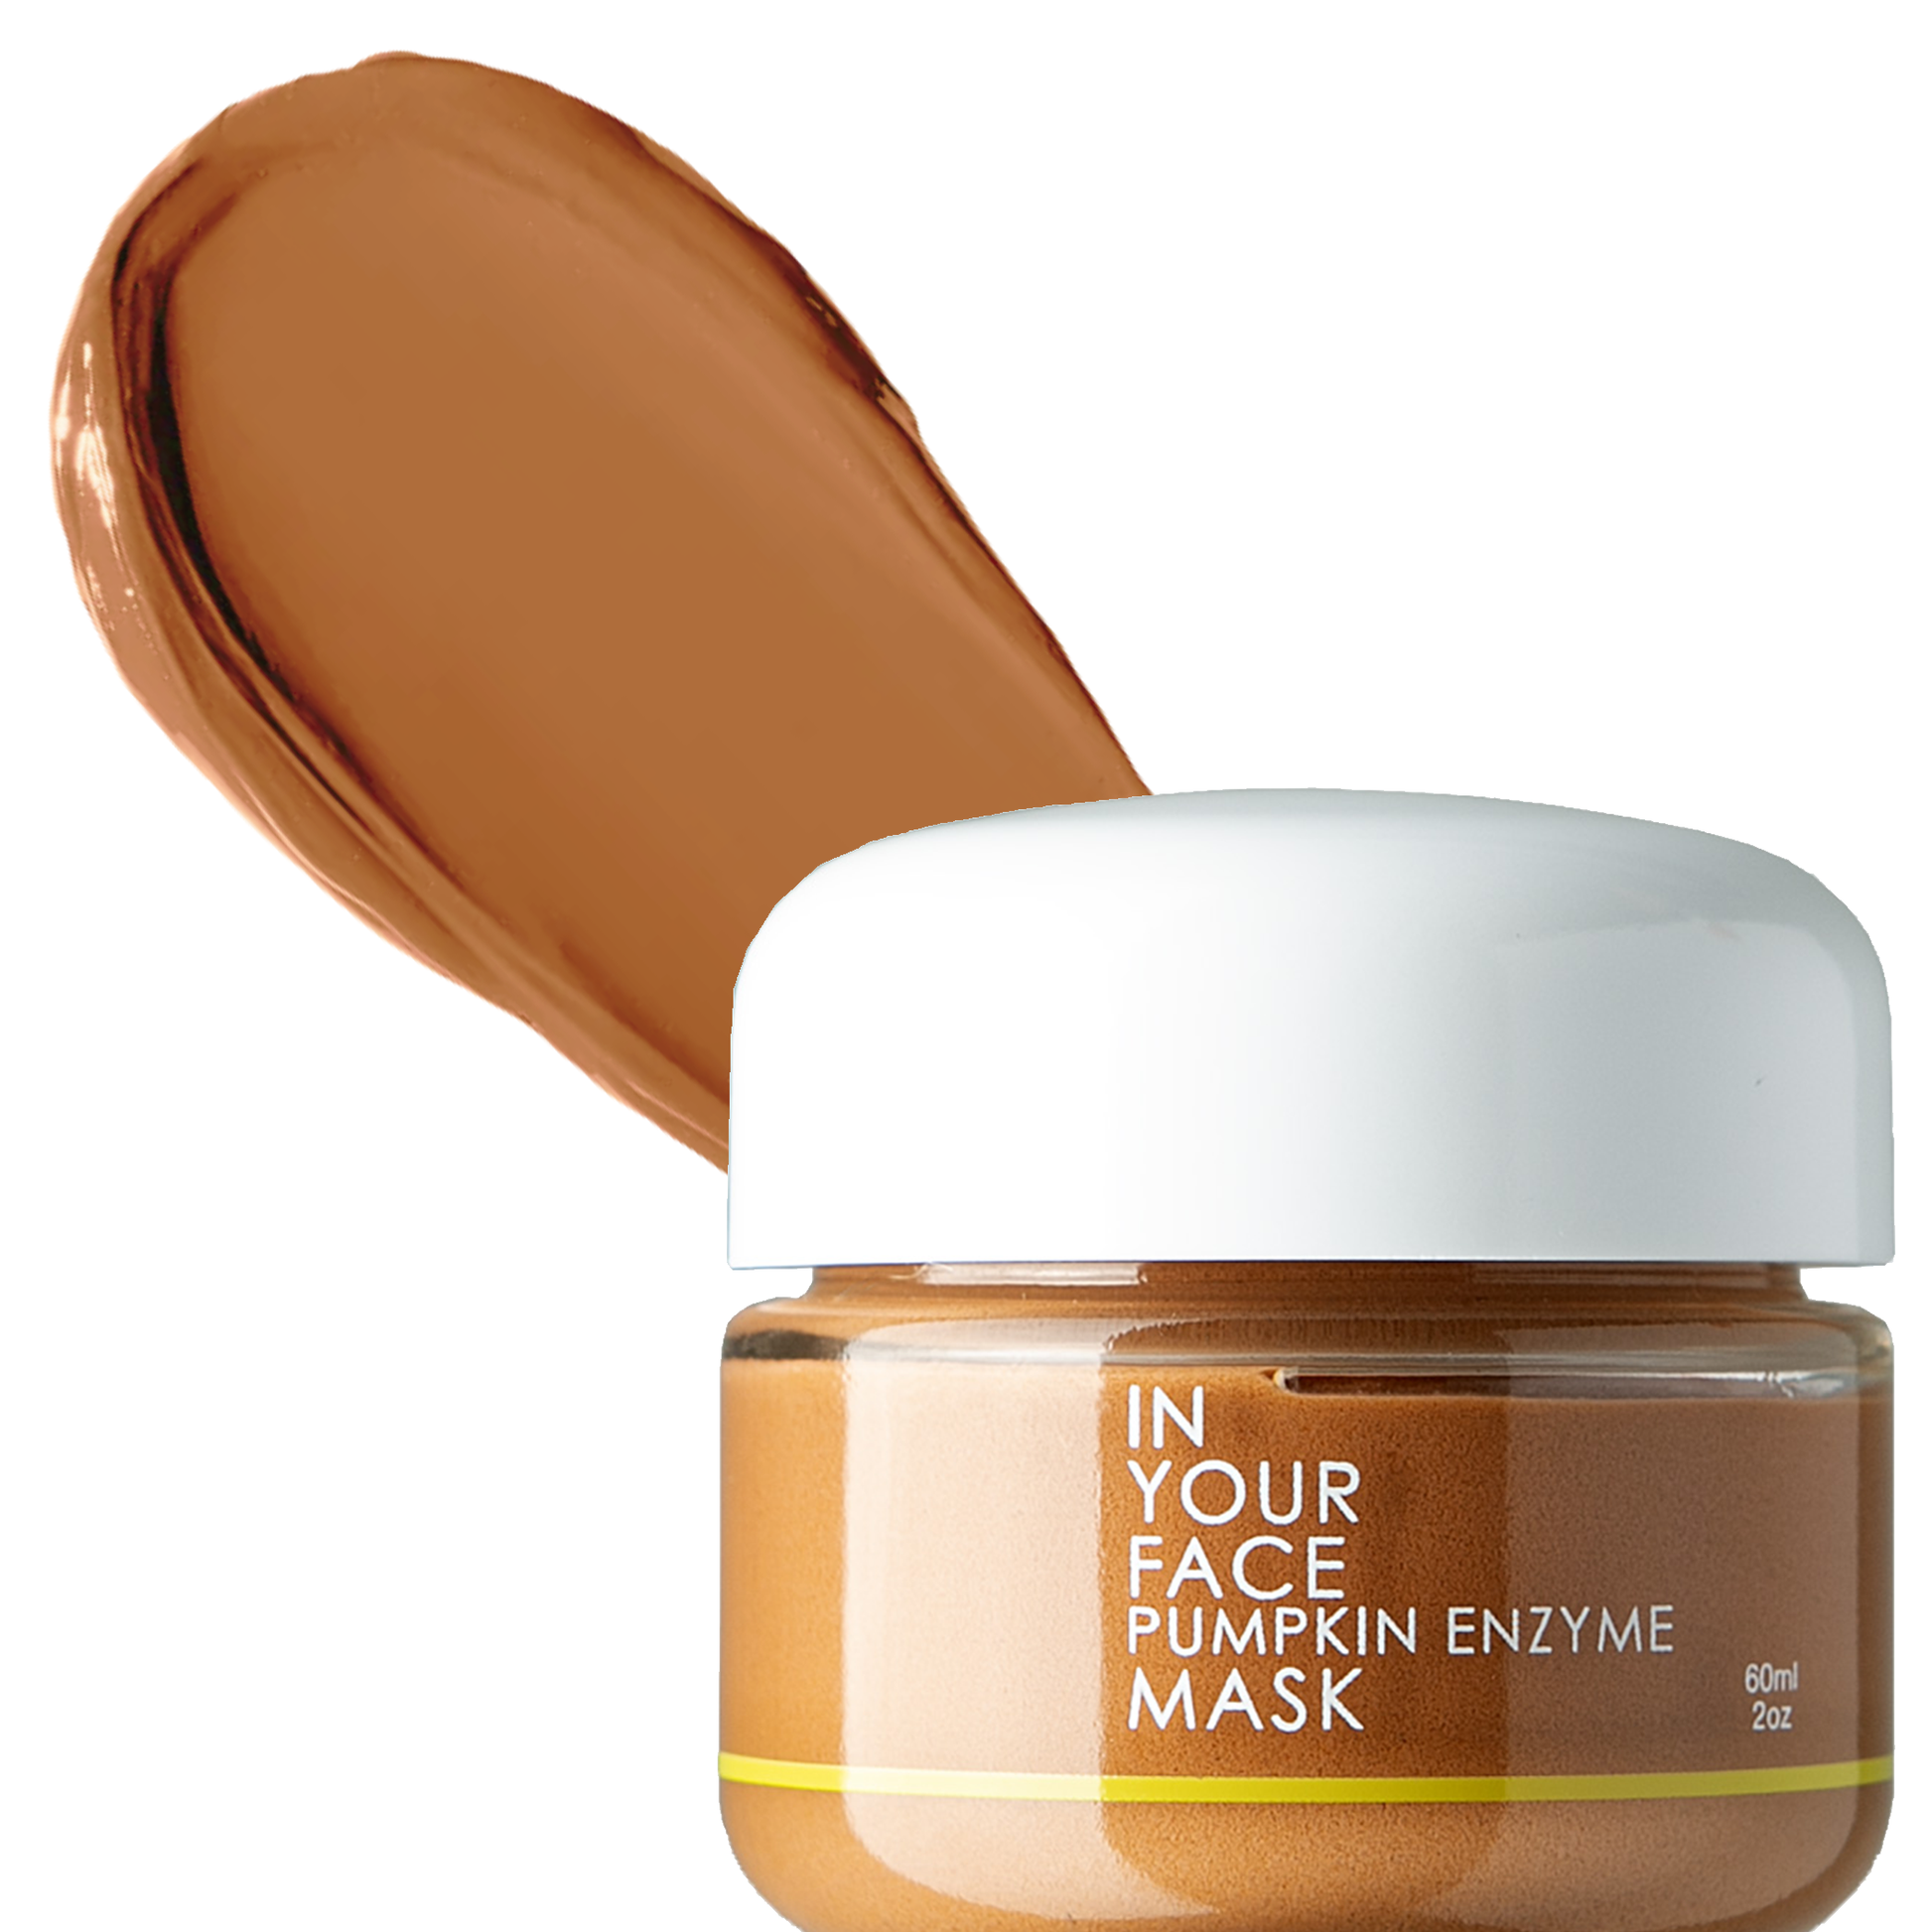 a clean photo of the PUMPKIN ENZYME MASK on a white background with a shadow under the jar. The photo shows the MASK to be a burnt orange color. The jar is next to a smear of the mask itself, showing it to be a smooth texture.